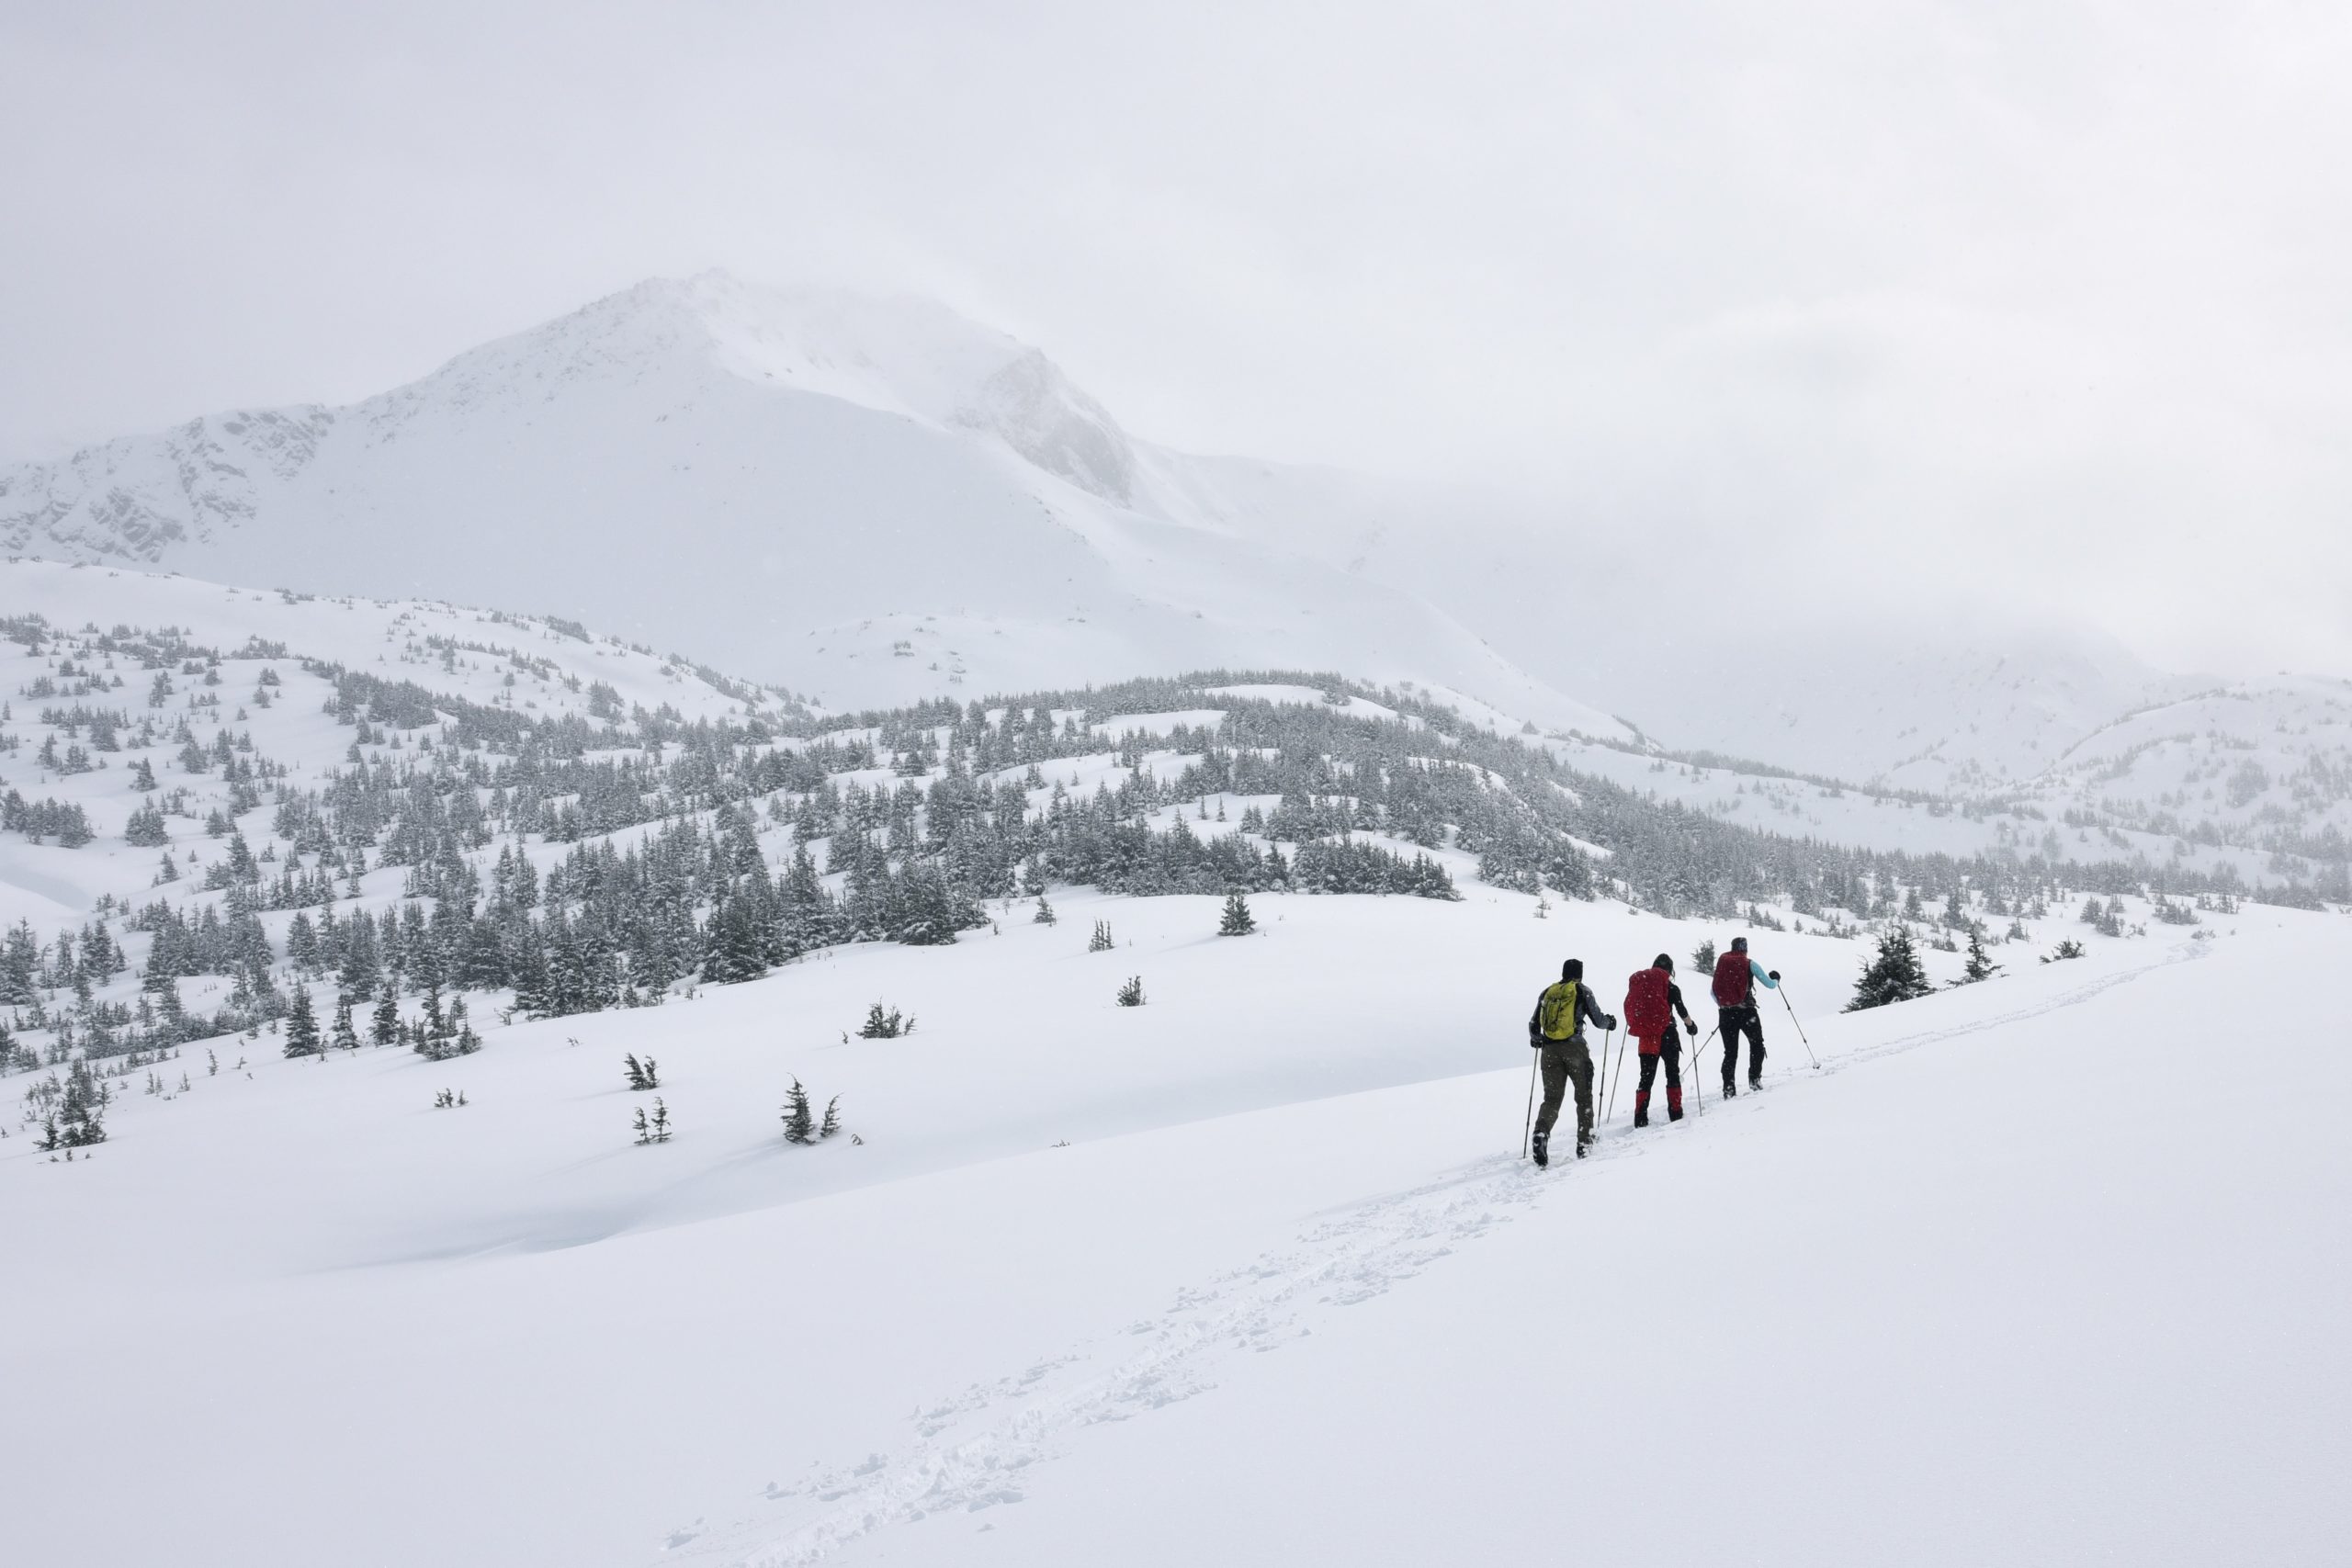 Three backcountry skiers skin up a track on a cloudy winter day. A snowy peak looms in the distance.